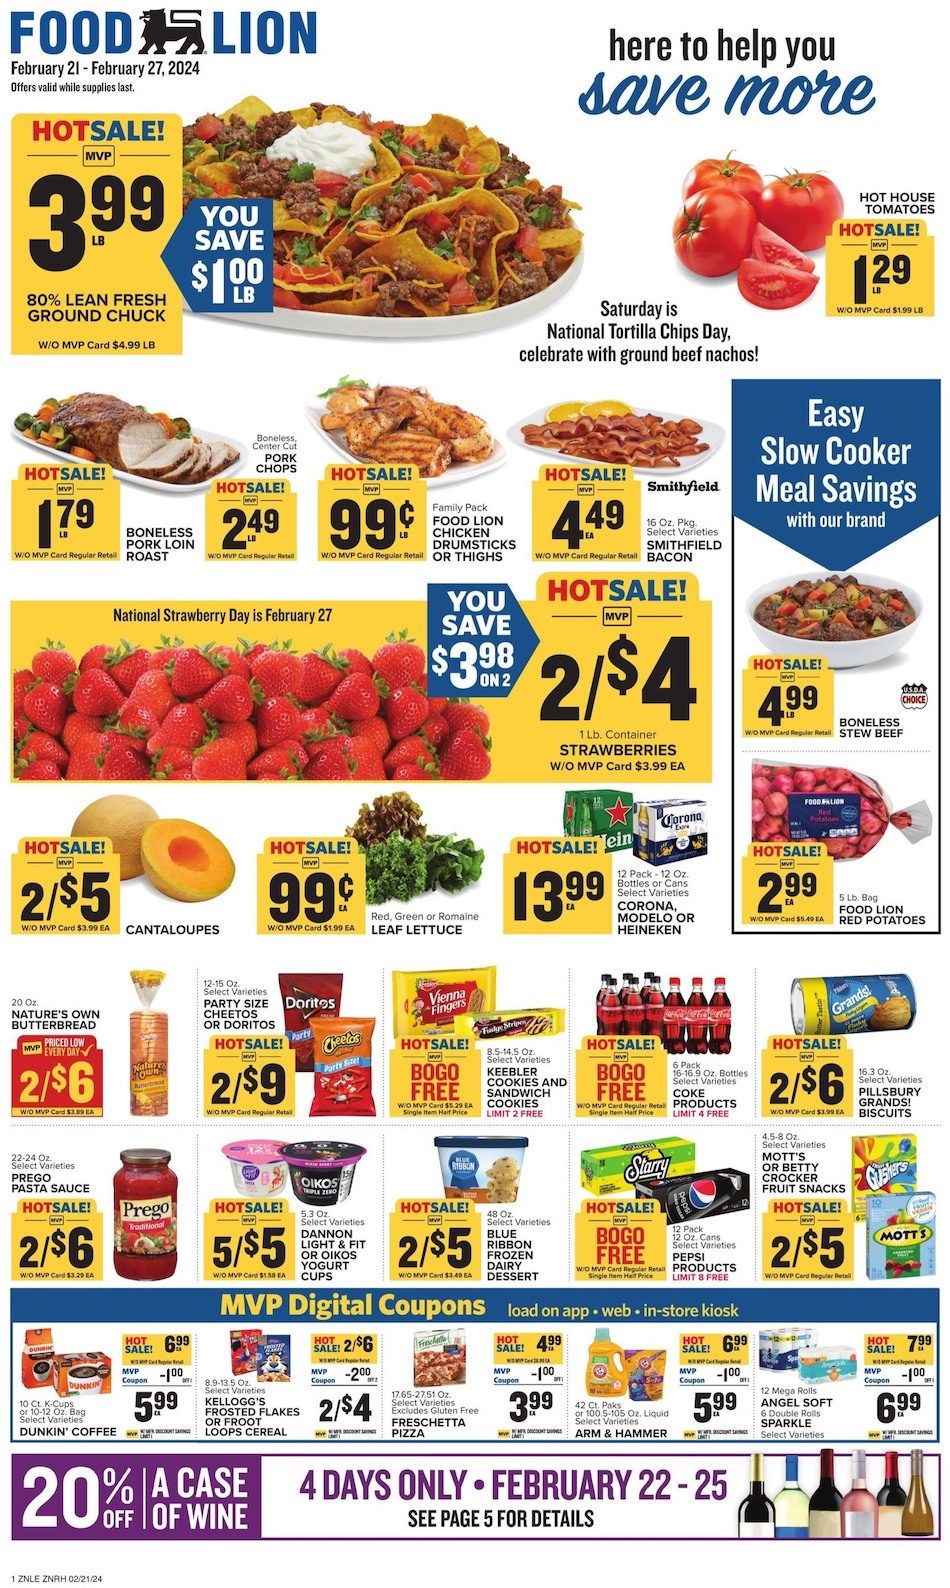 Food Lion Weekly ad 21st – 27th February 2024 Page 1